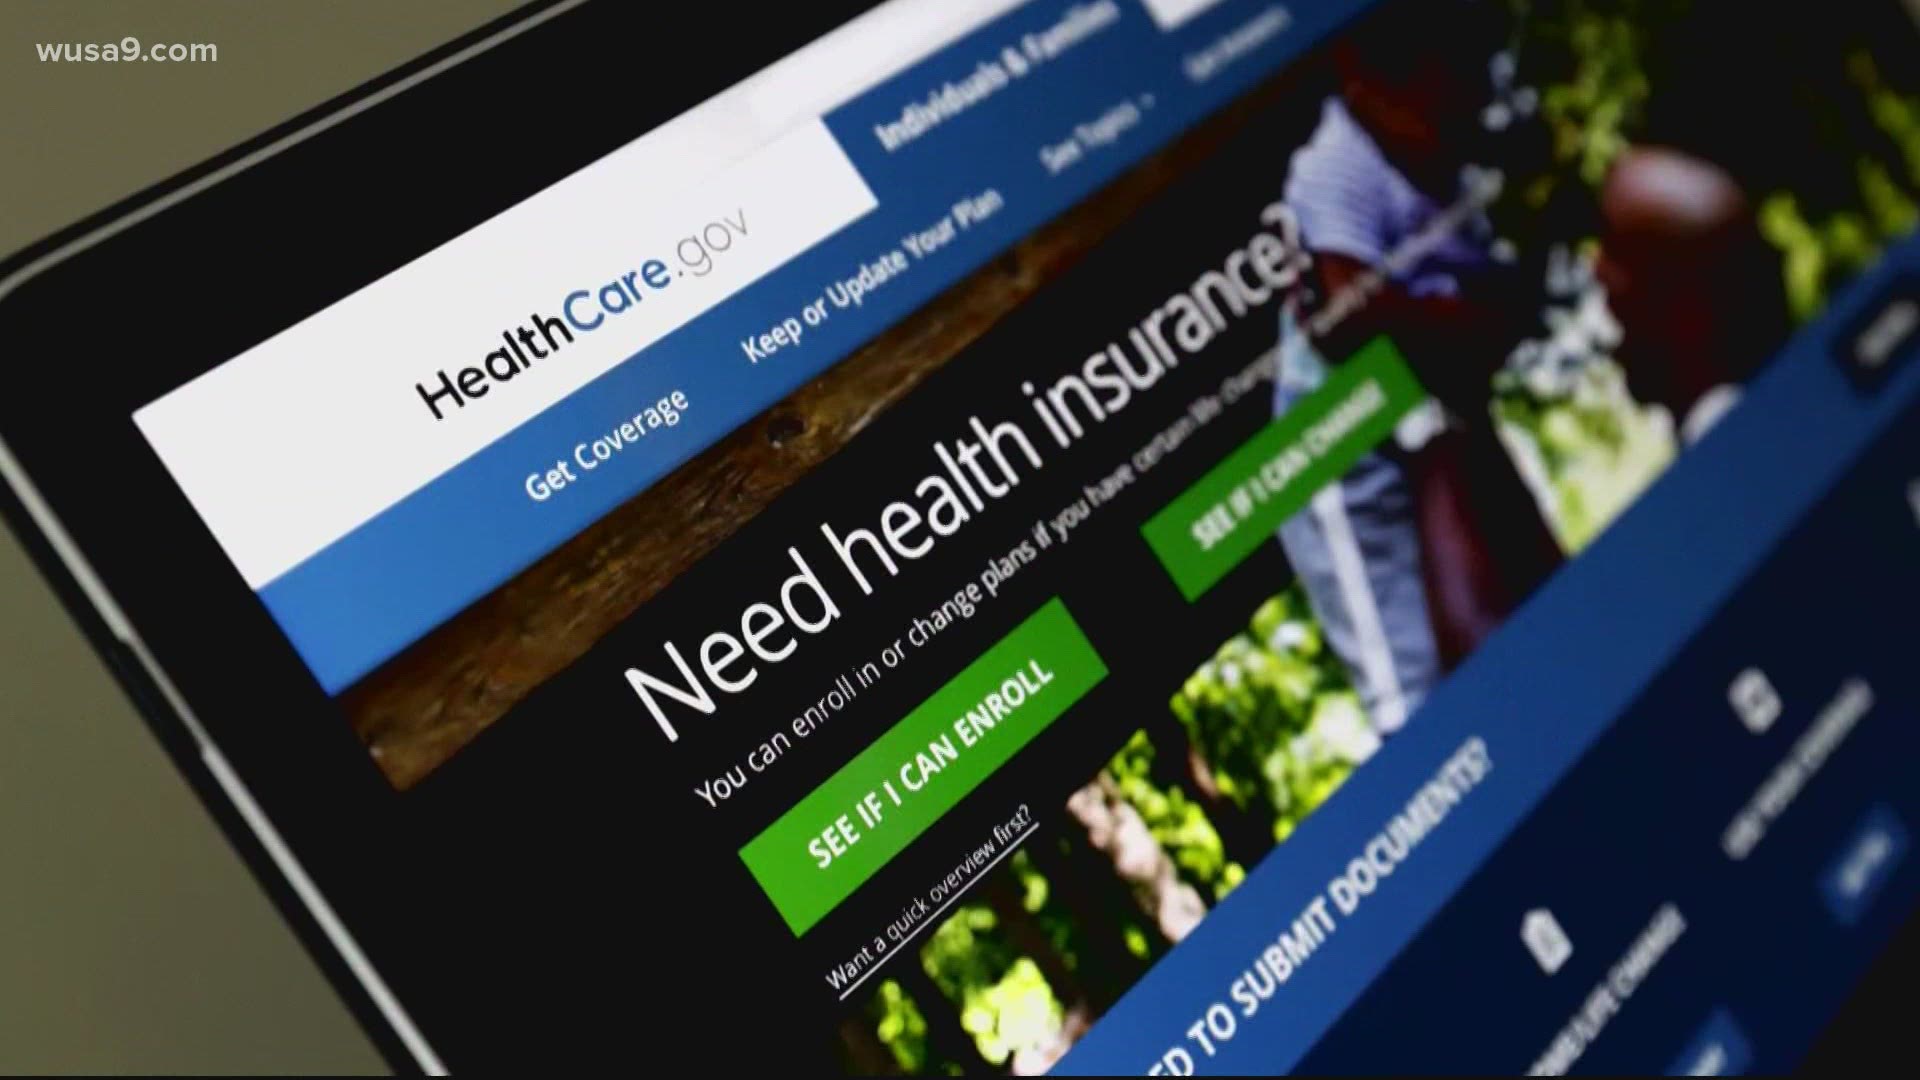 Liz Weston, a financial expert at Nerdwallet, says she sees premiums rising if Obamacare is repealed